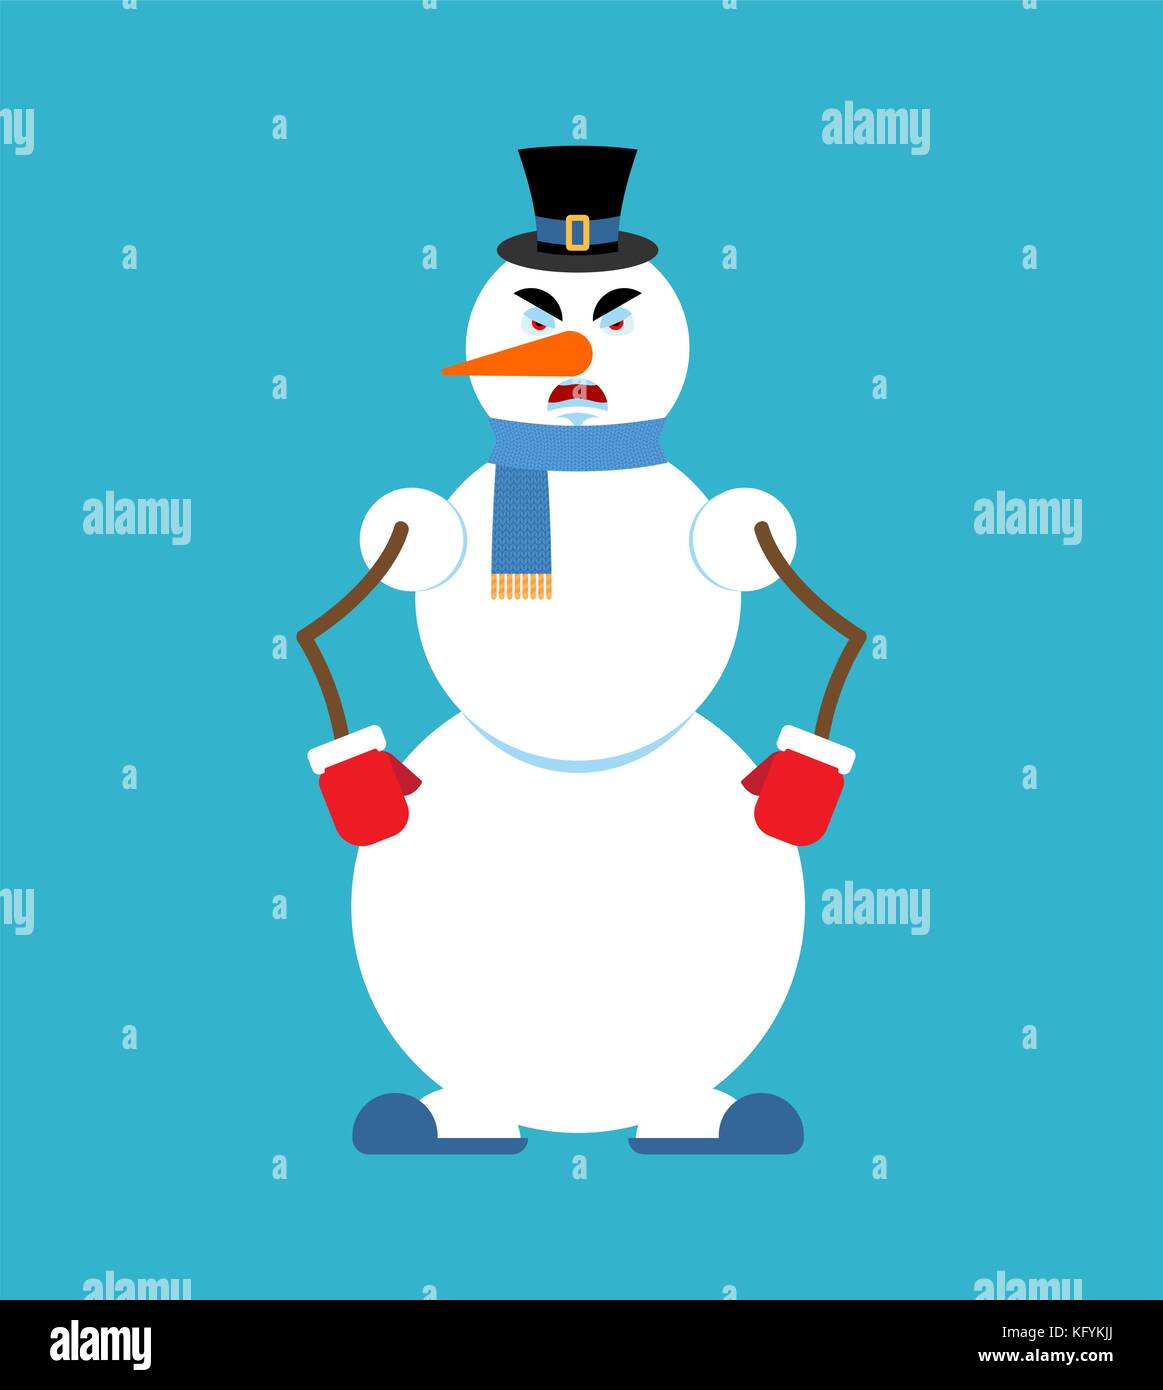 Snowman angry. Snowman Evil emoji. New Year and Christmas vector illustration Stock Vector